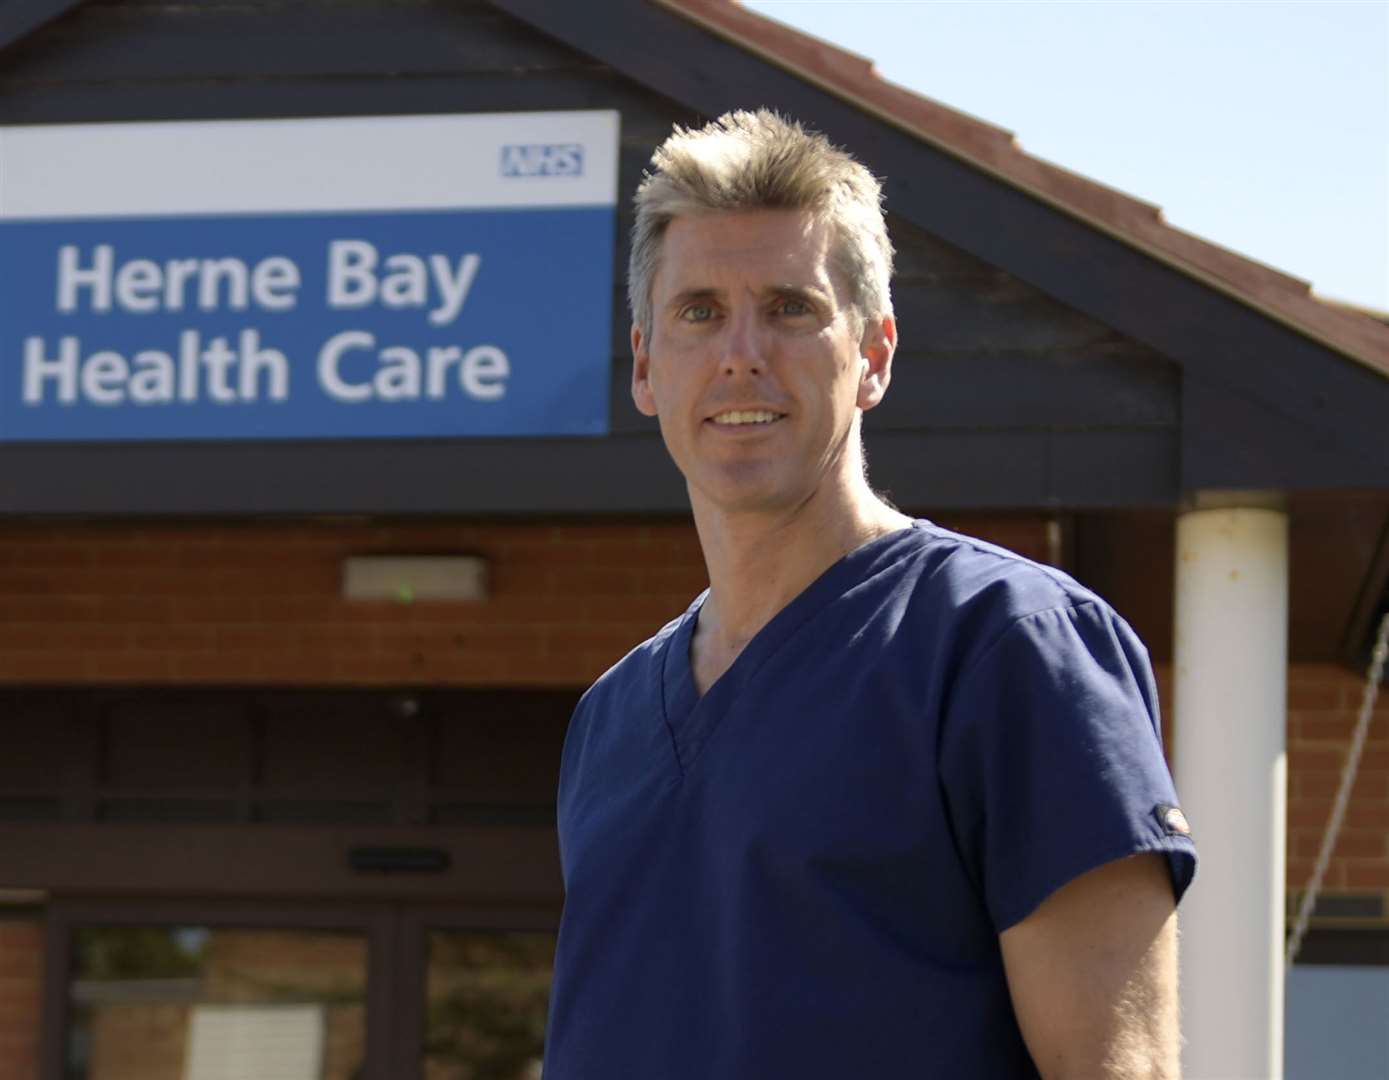 Dr Jeremy Carter says he is 'confident' the February 15 target will be met in Herne Bay, if there are no problems with the supply of vaccines. Picture: Barry Goodwin